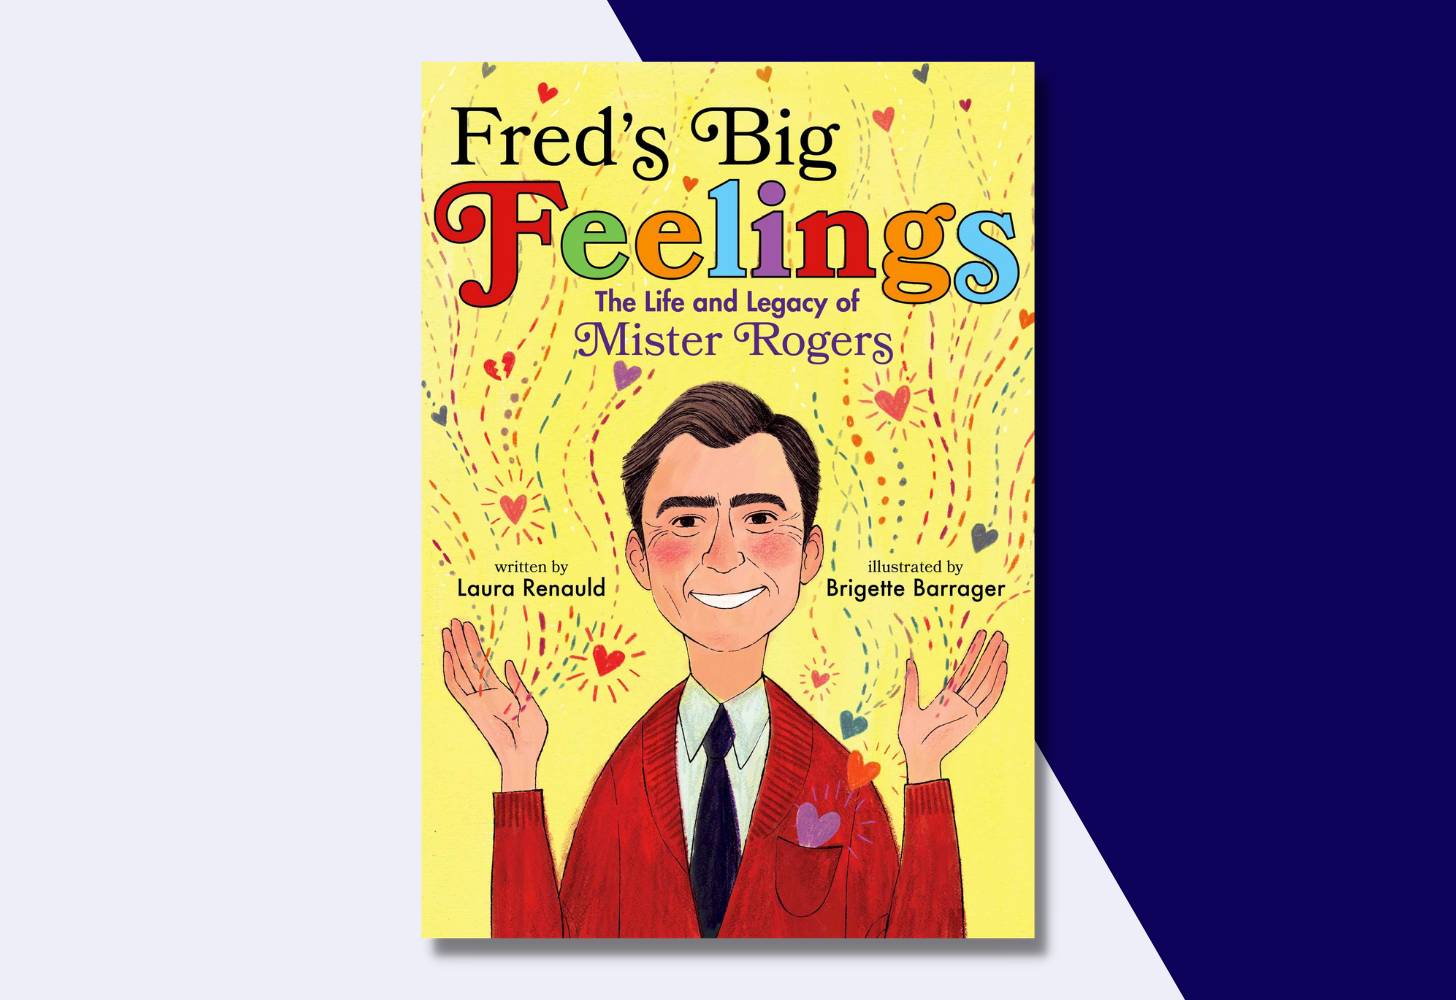 “Fred’s Big Feelings: The Life and Legacy of Mister Rogers” by Laura Renauld, illustrated by Brigette Barrager 